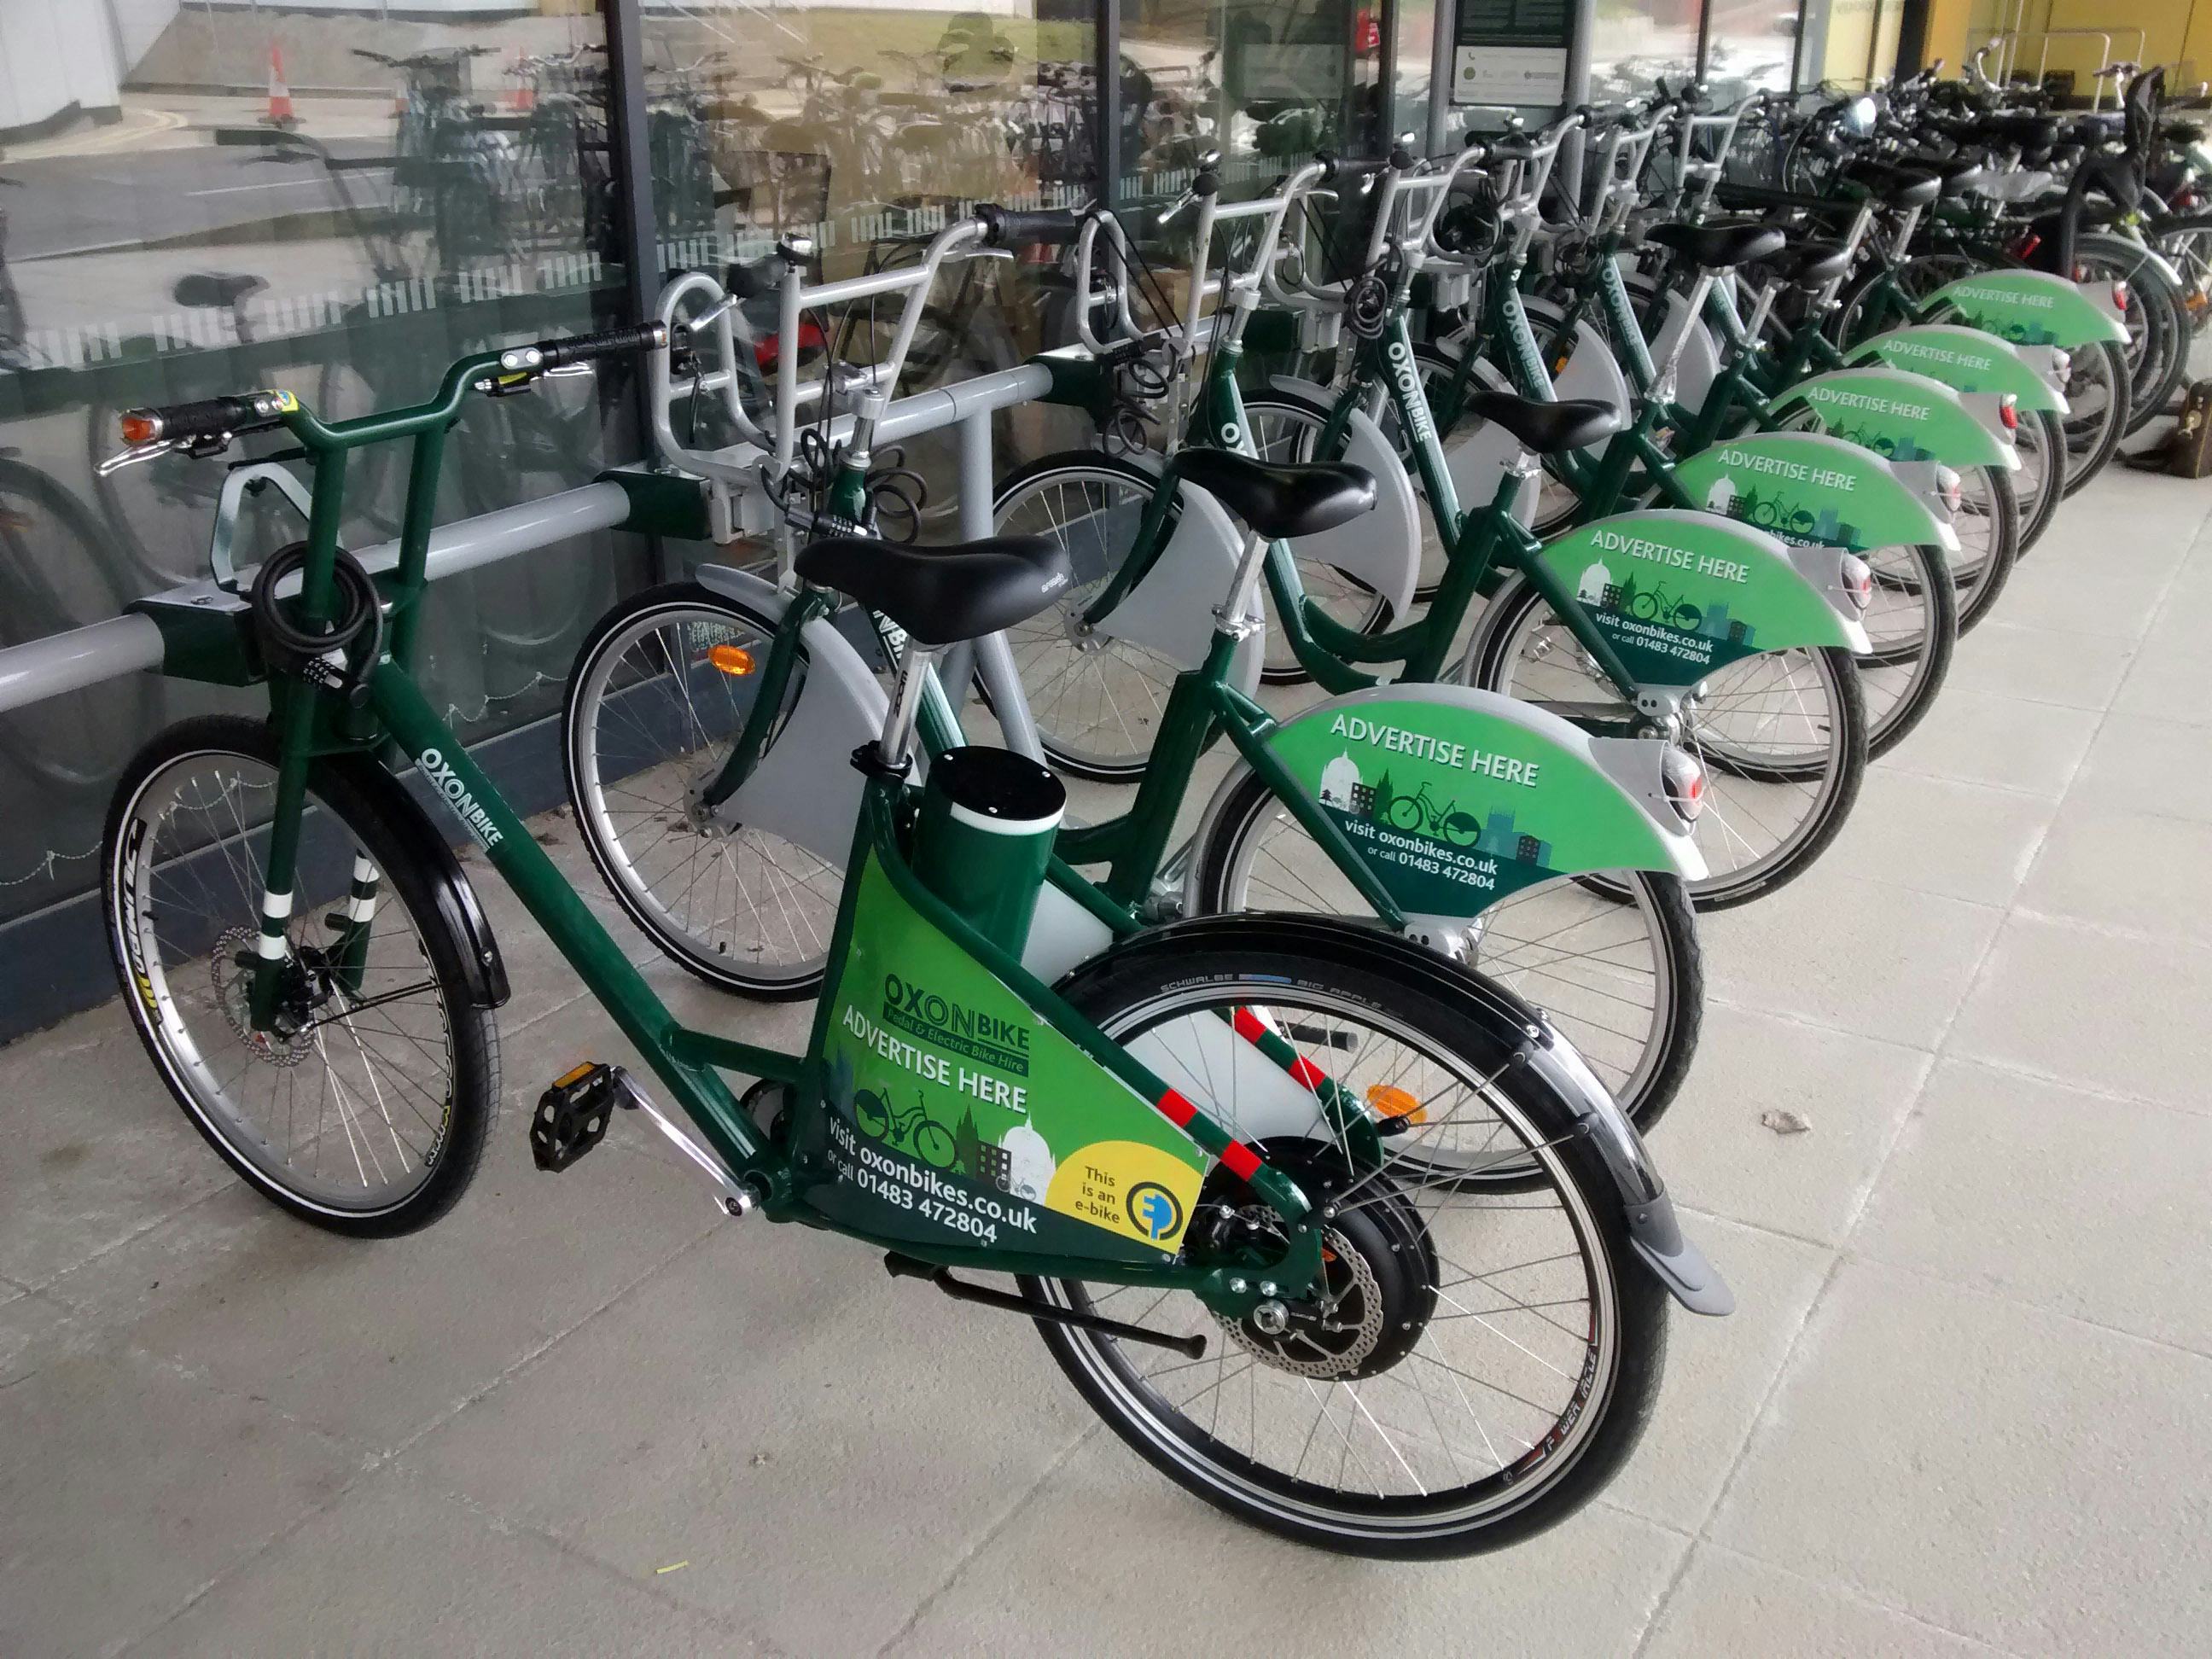 UK government made GBP 700,000 (€ 906,000) available to fund e-bike sharing projects. - Photo OxonBike